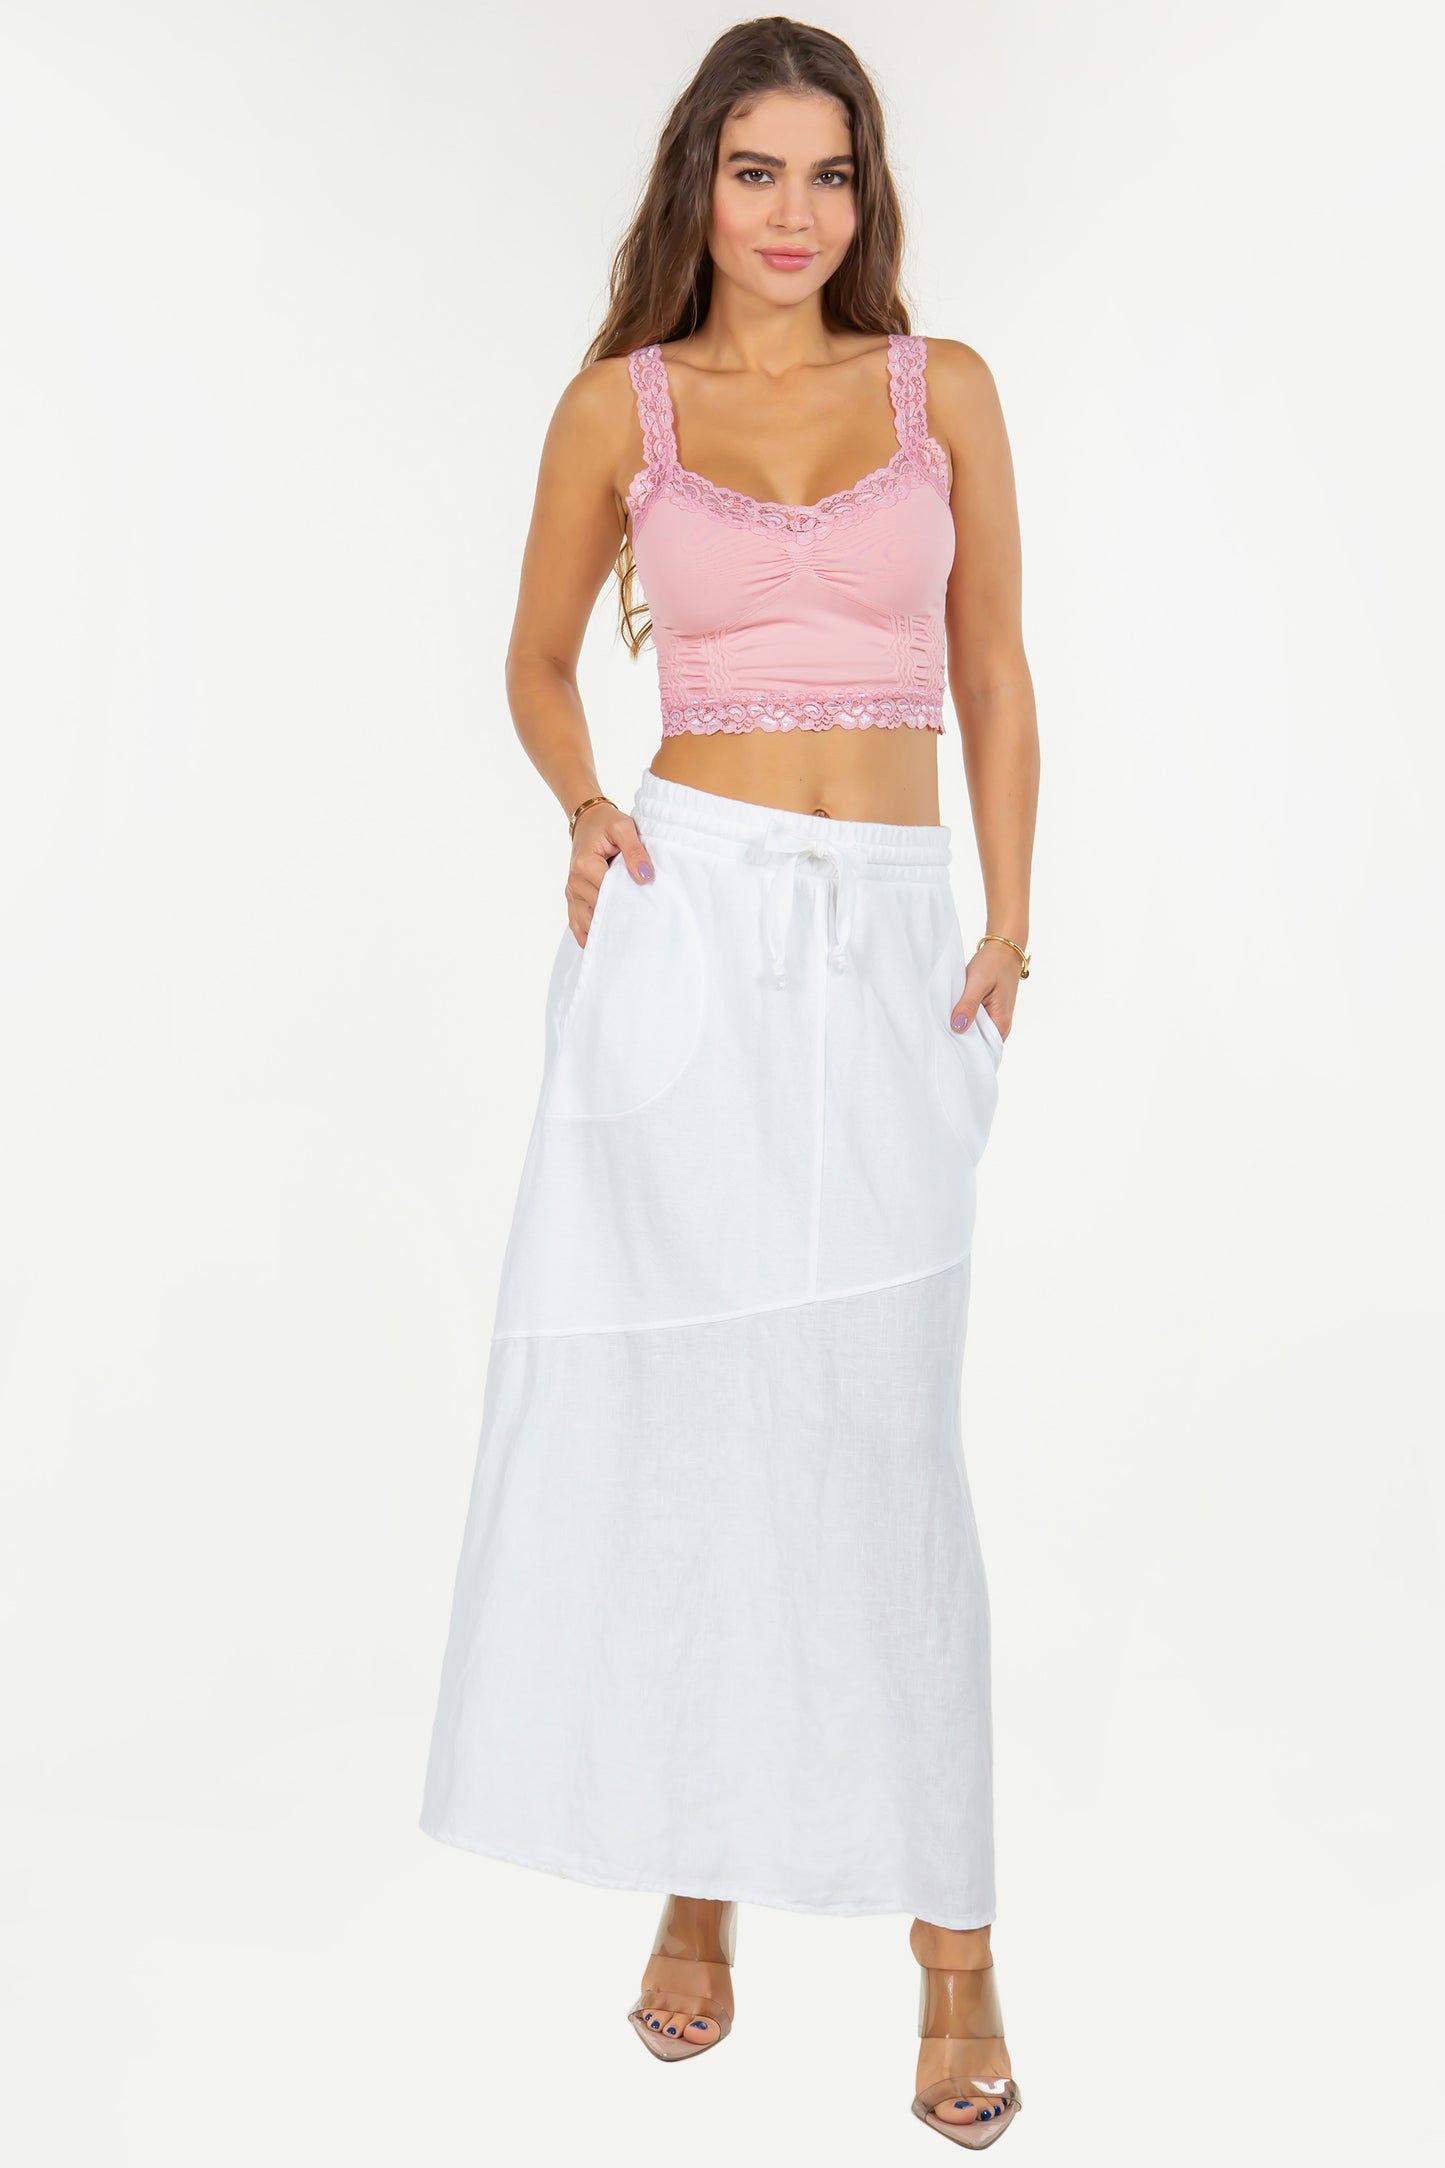 French Terry Maxi Skirt